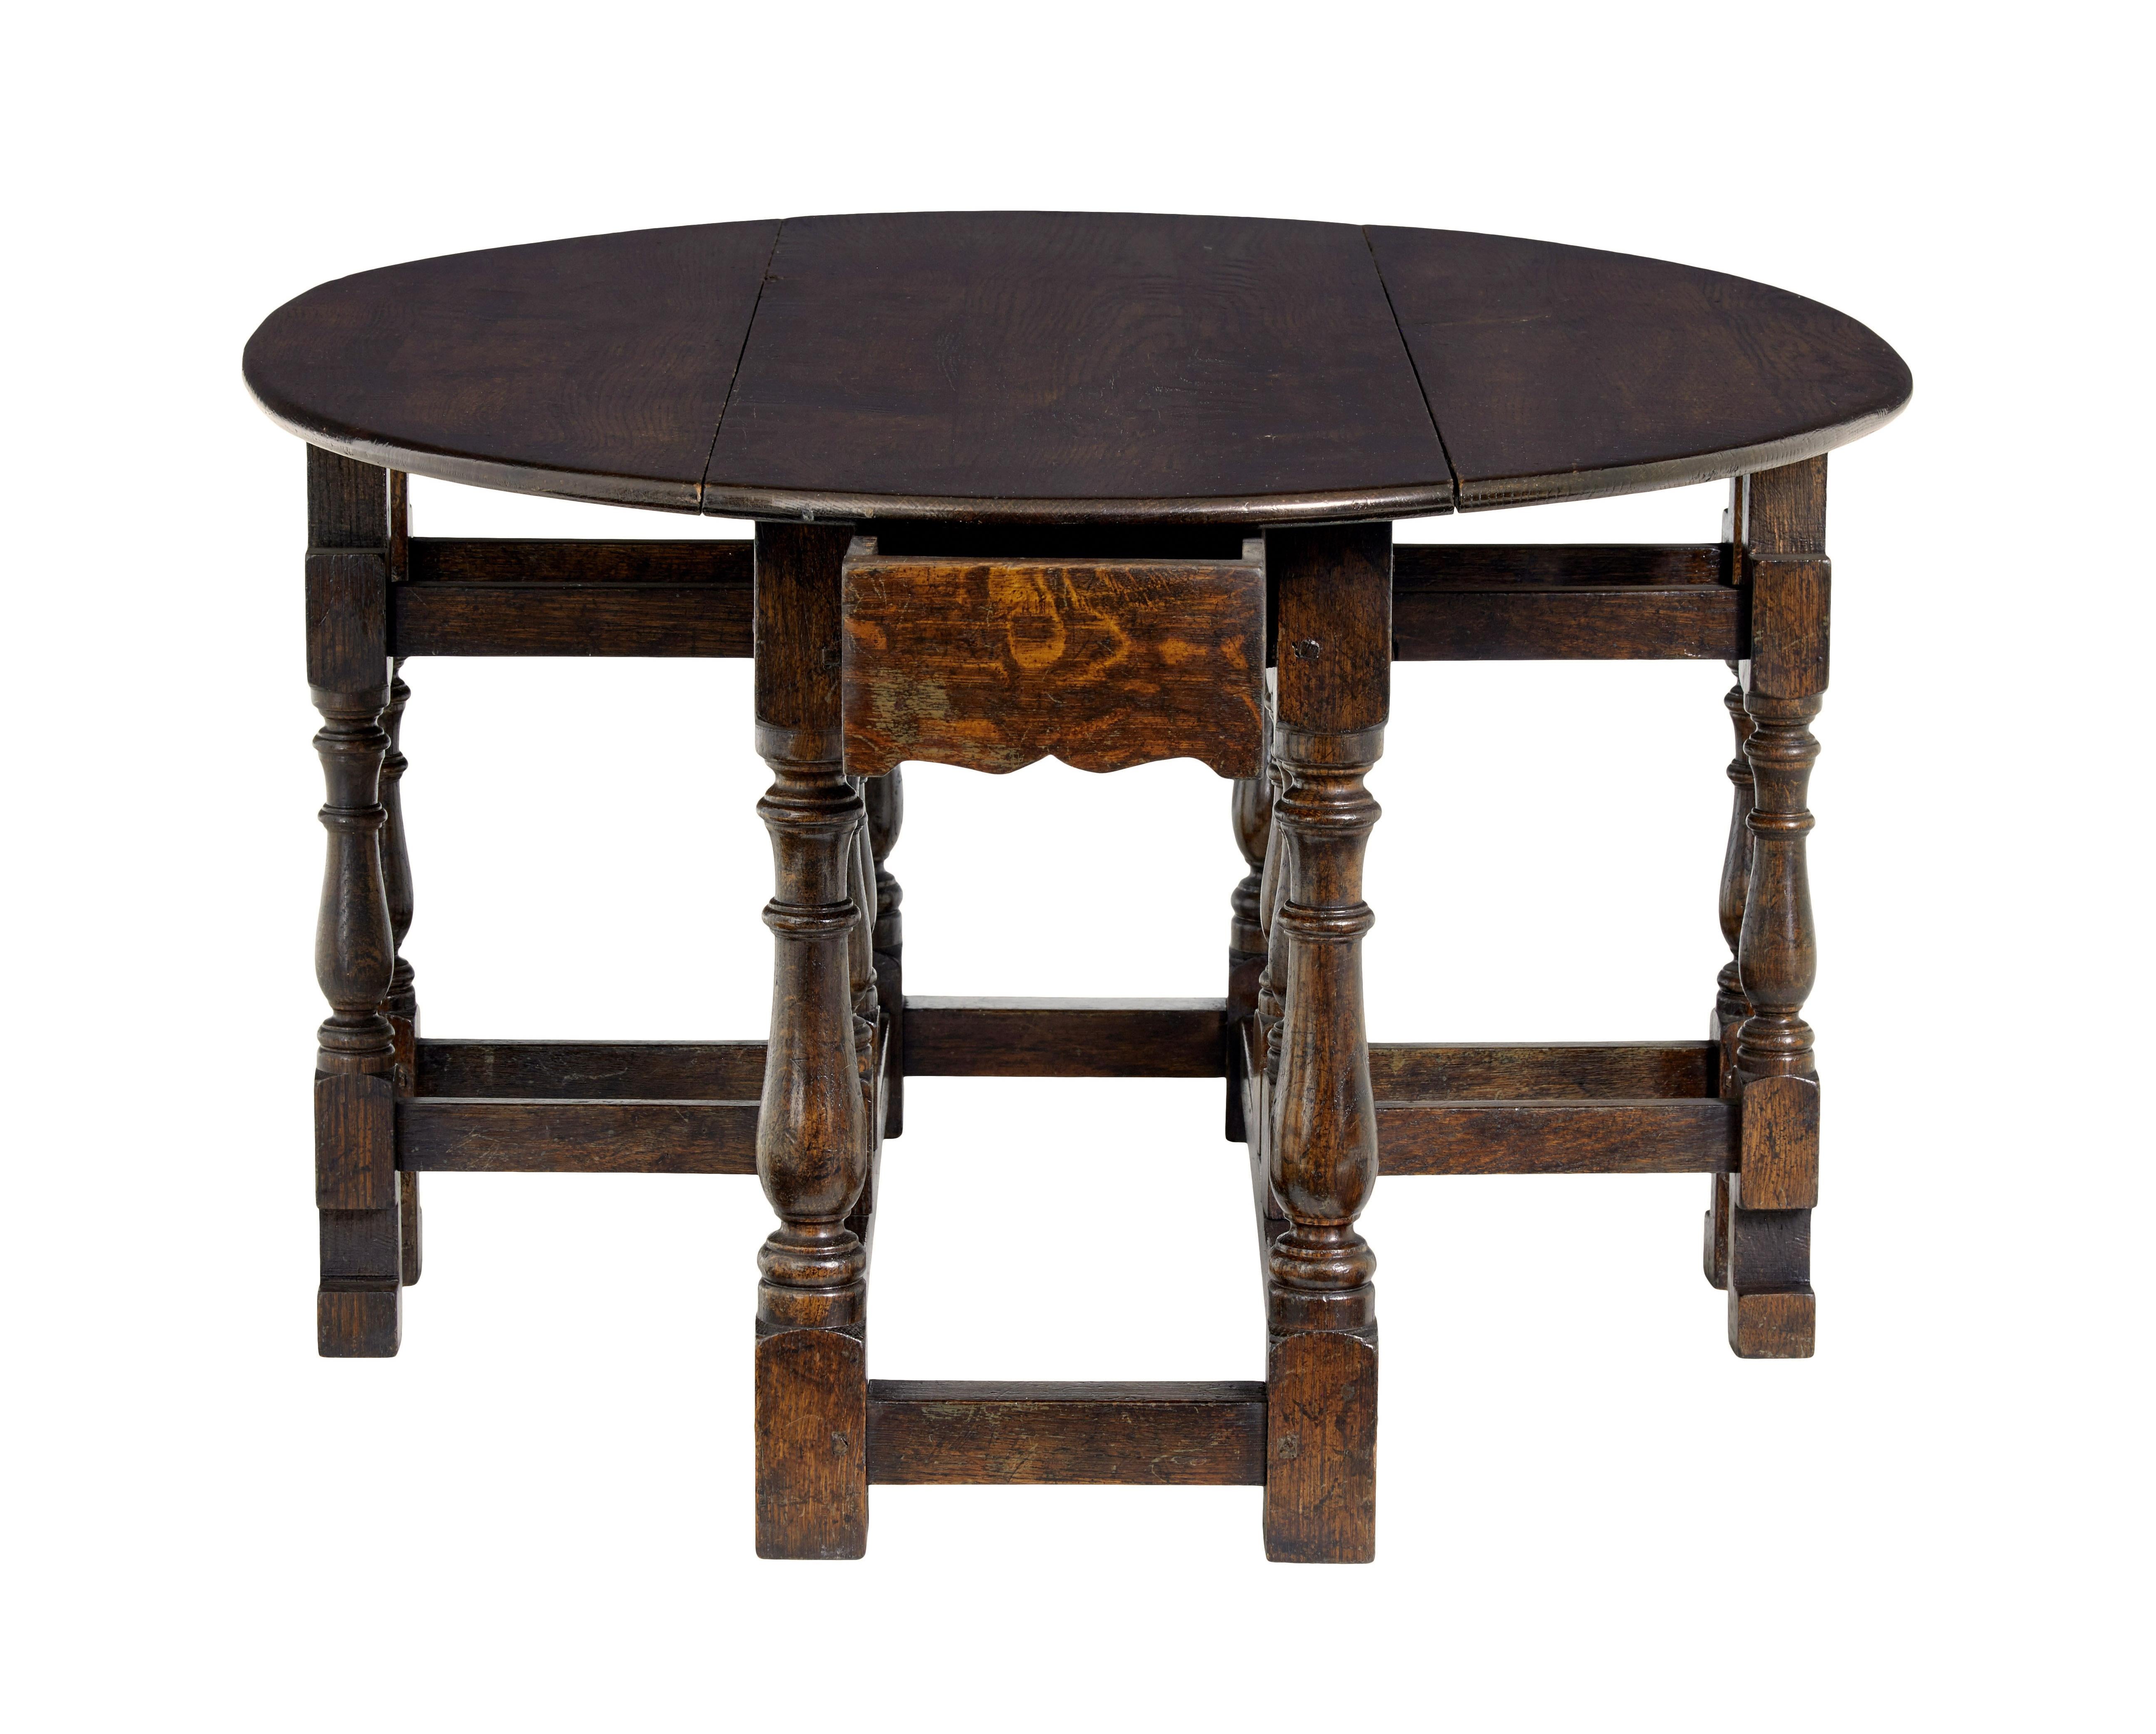 20th century oak Georgian style oak gateleg table circa 1990.

Good quality english made solid oak occasional / coffee table.  Made in the style of late georgian to early victorian rustic furniture.

Gateleg design which has been re-scaled into